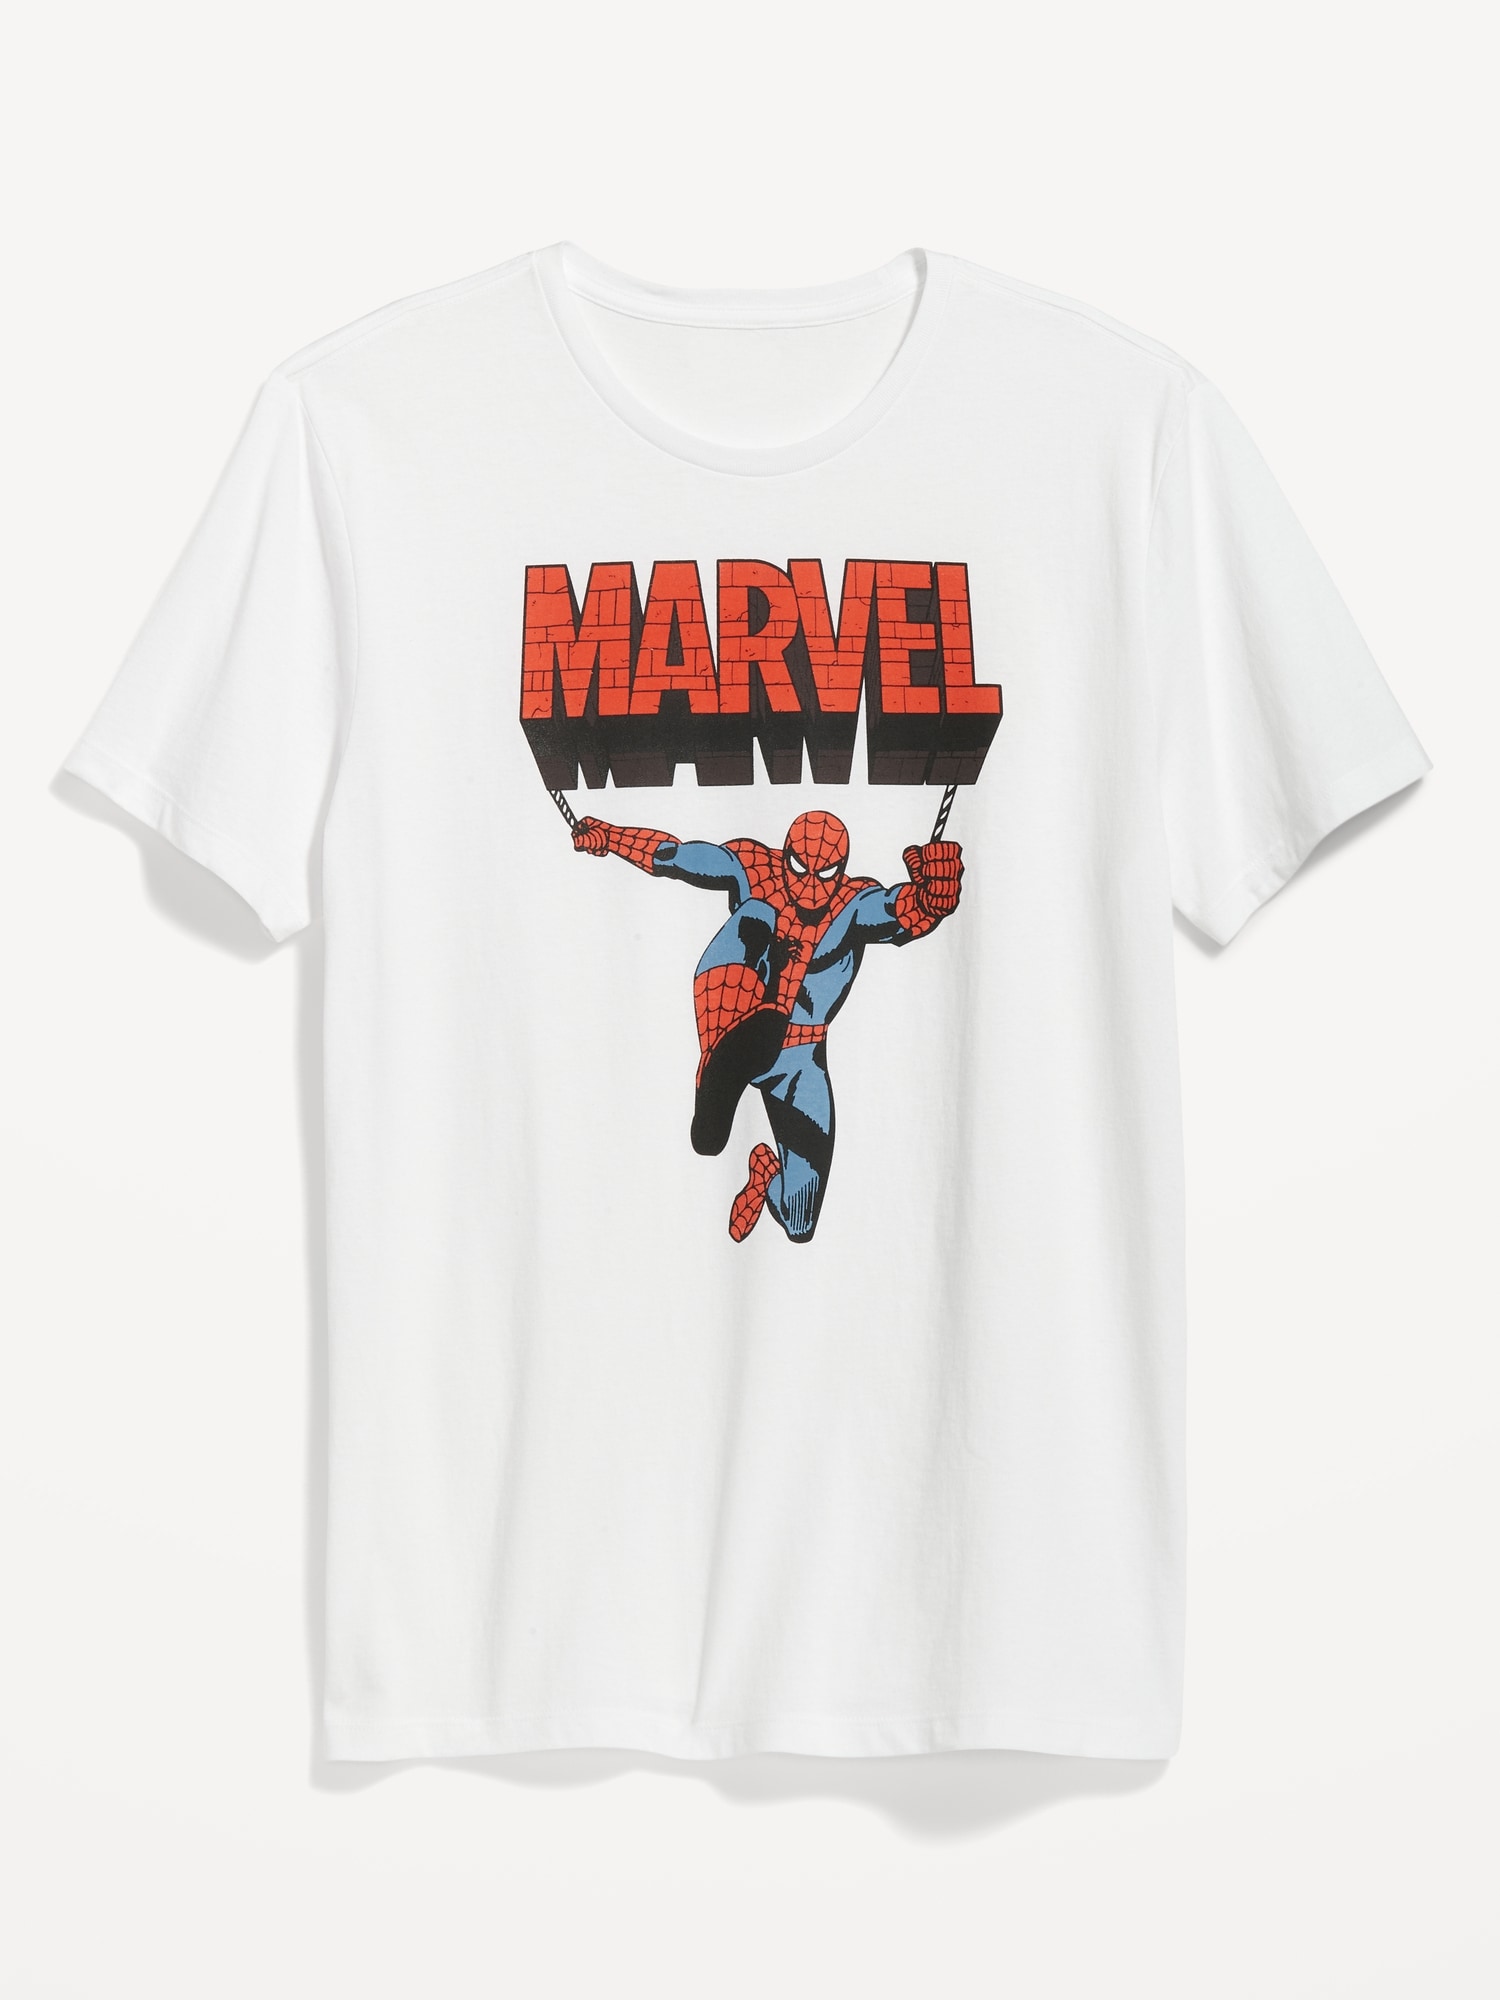 Old Navy Marvel™ Spider-Man Gender-Neutral Graphic T-Shirt for Adults white. 1